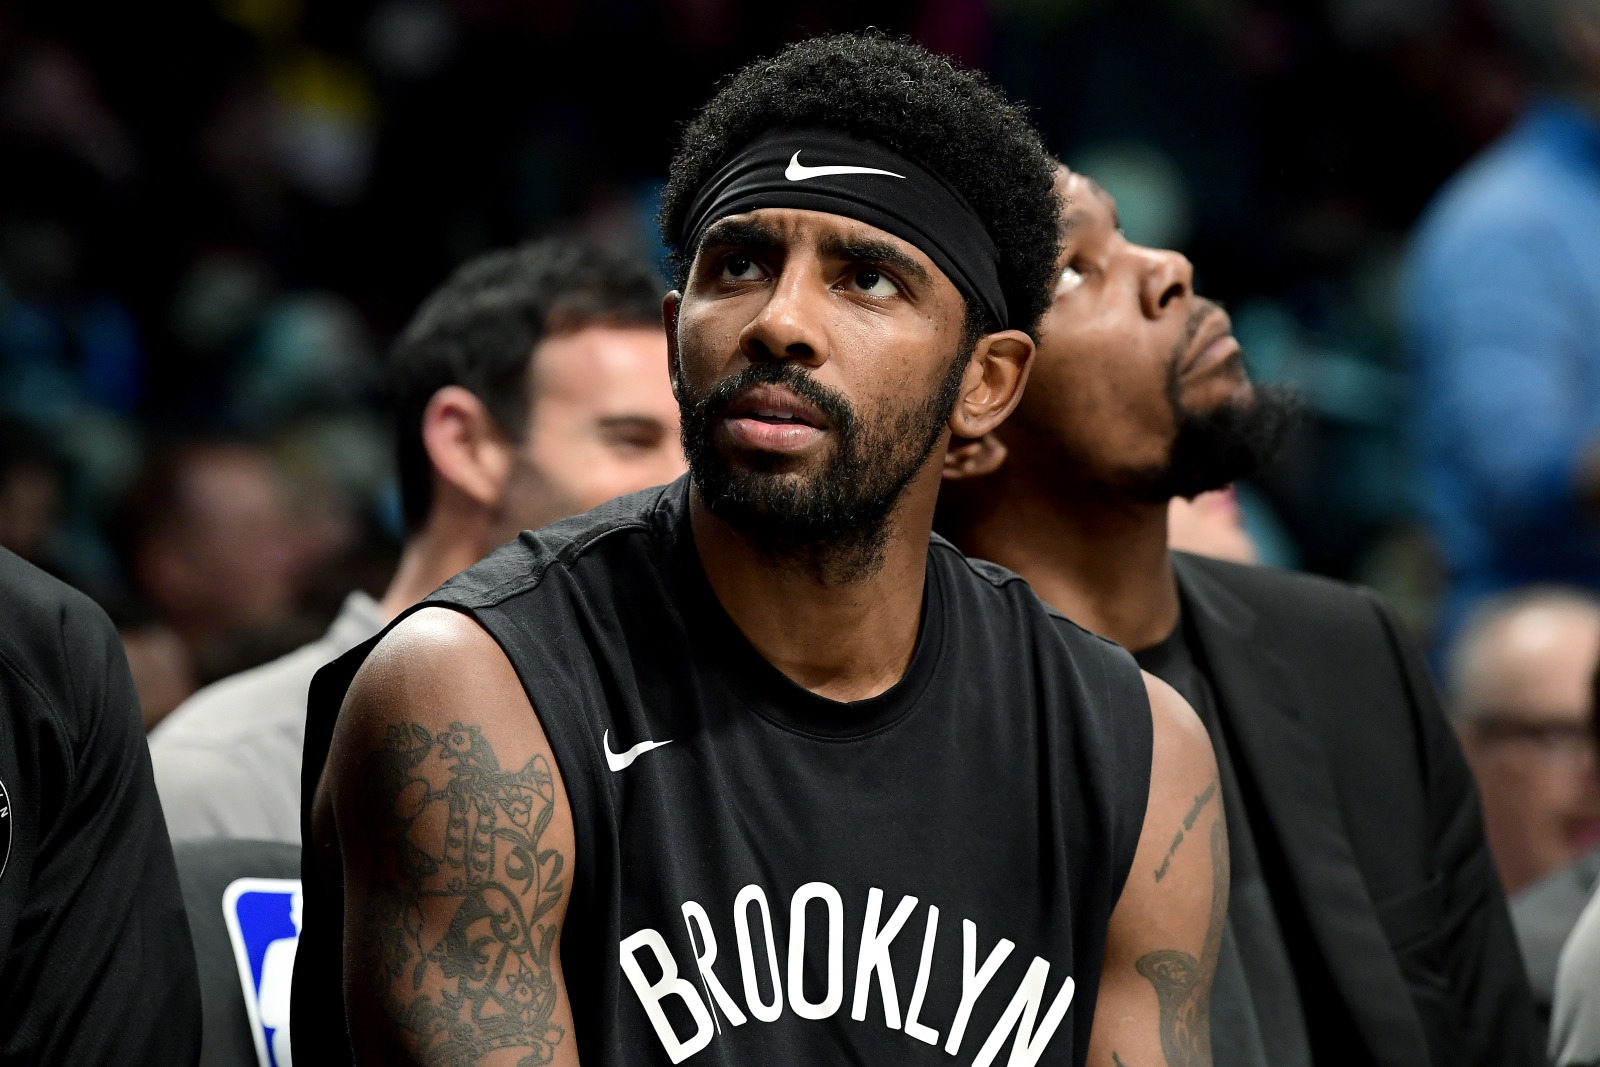 Kyrie Irving is not participating in the NBA restart with the Brooklyn Nets at Disney. He, however, is still addressing his critics.